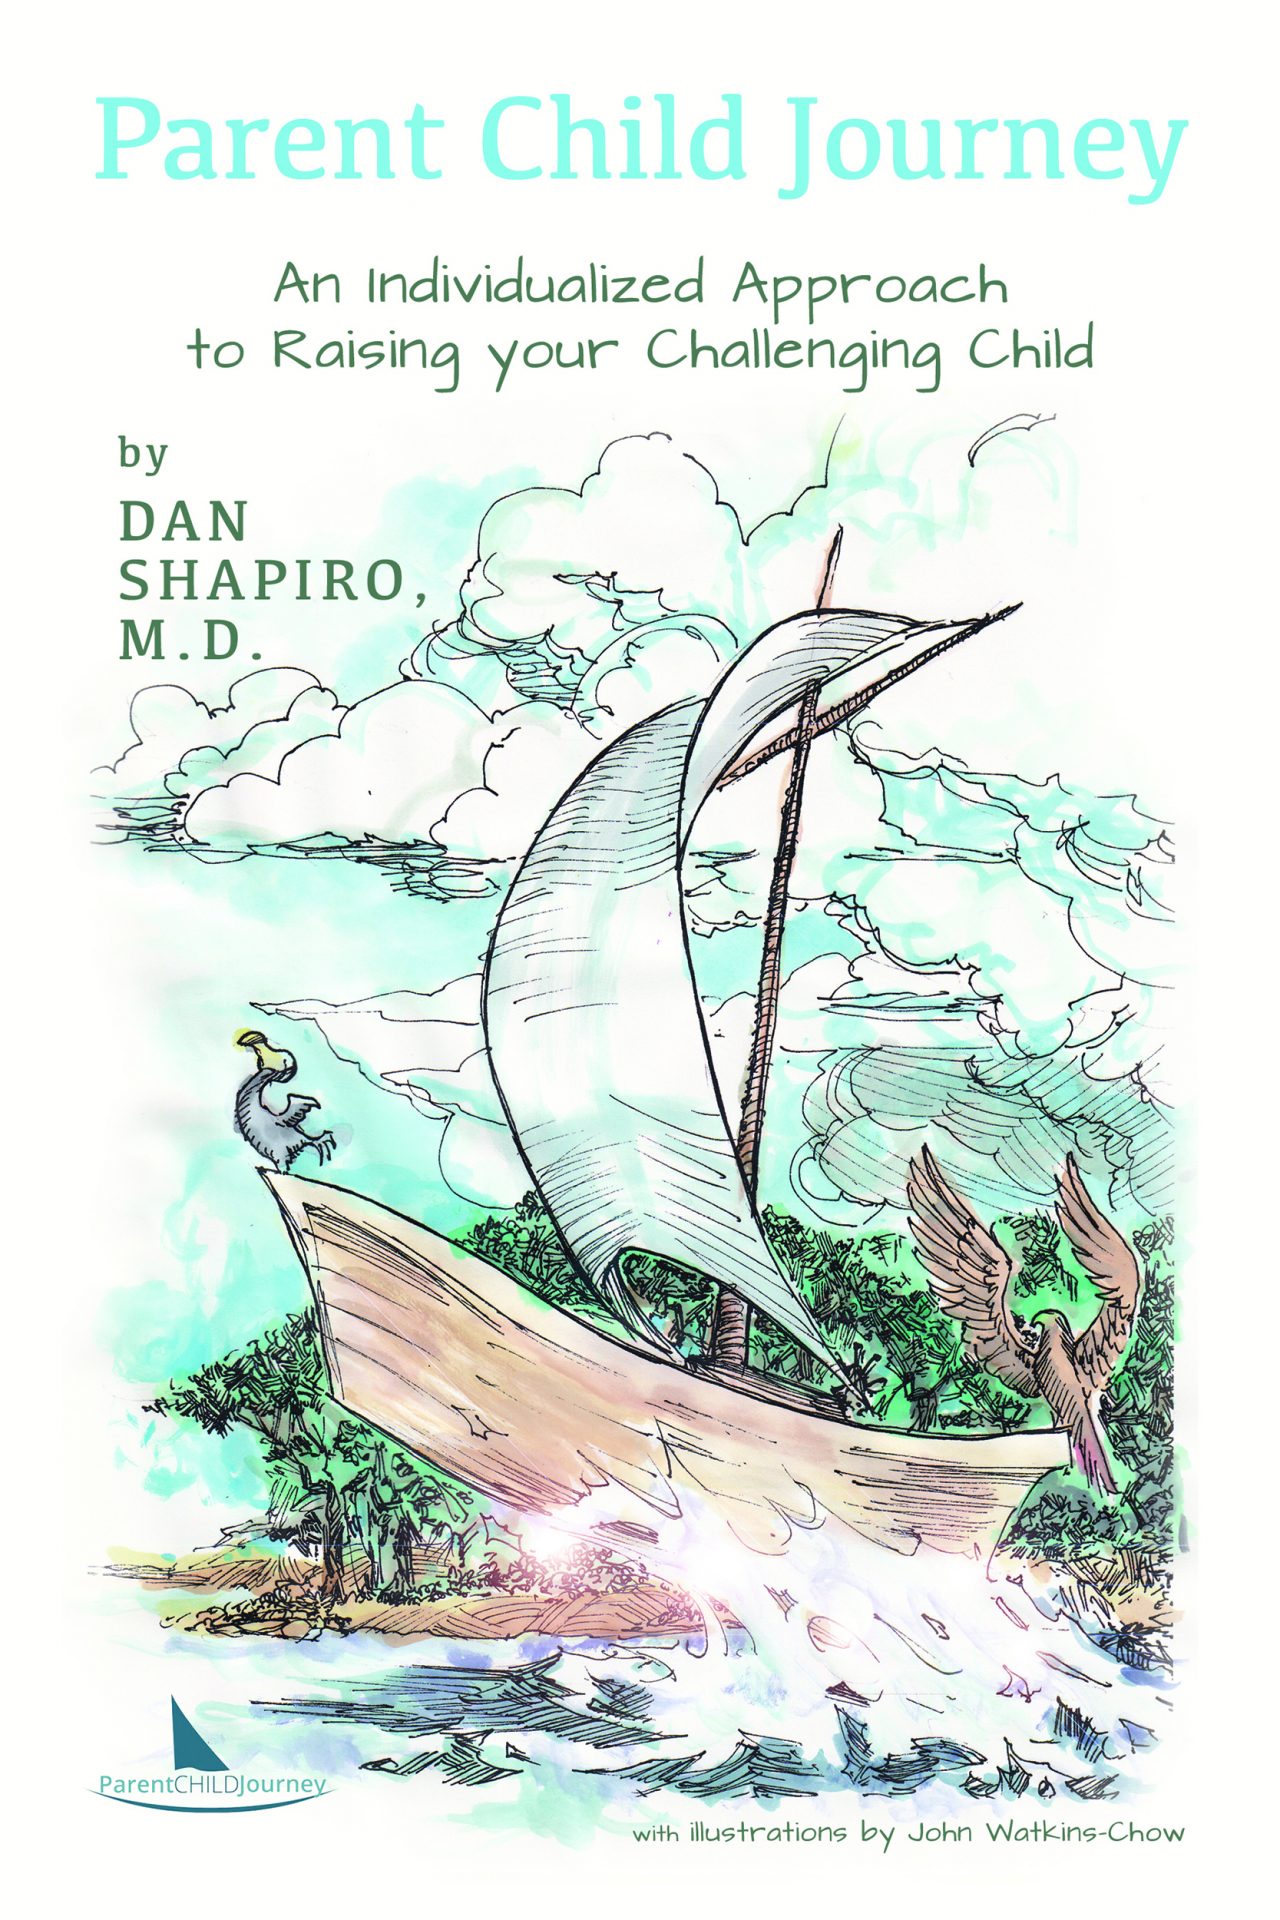 Parent Child Journey: An Individualized Approach to Raising Your Challenging Child